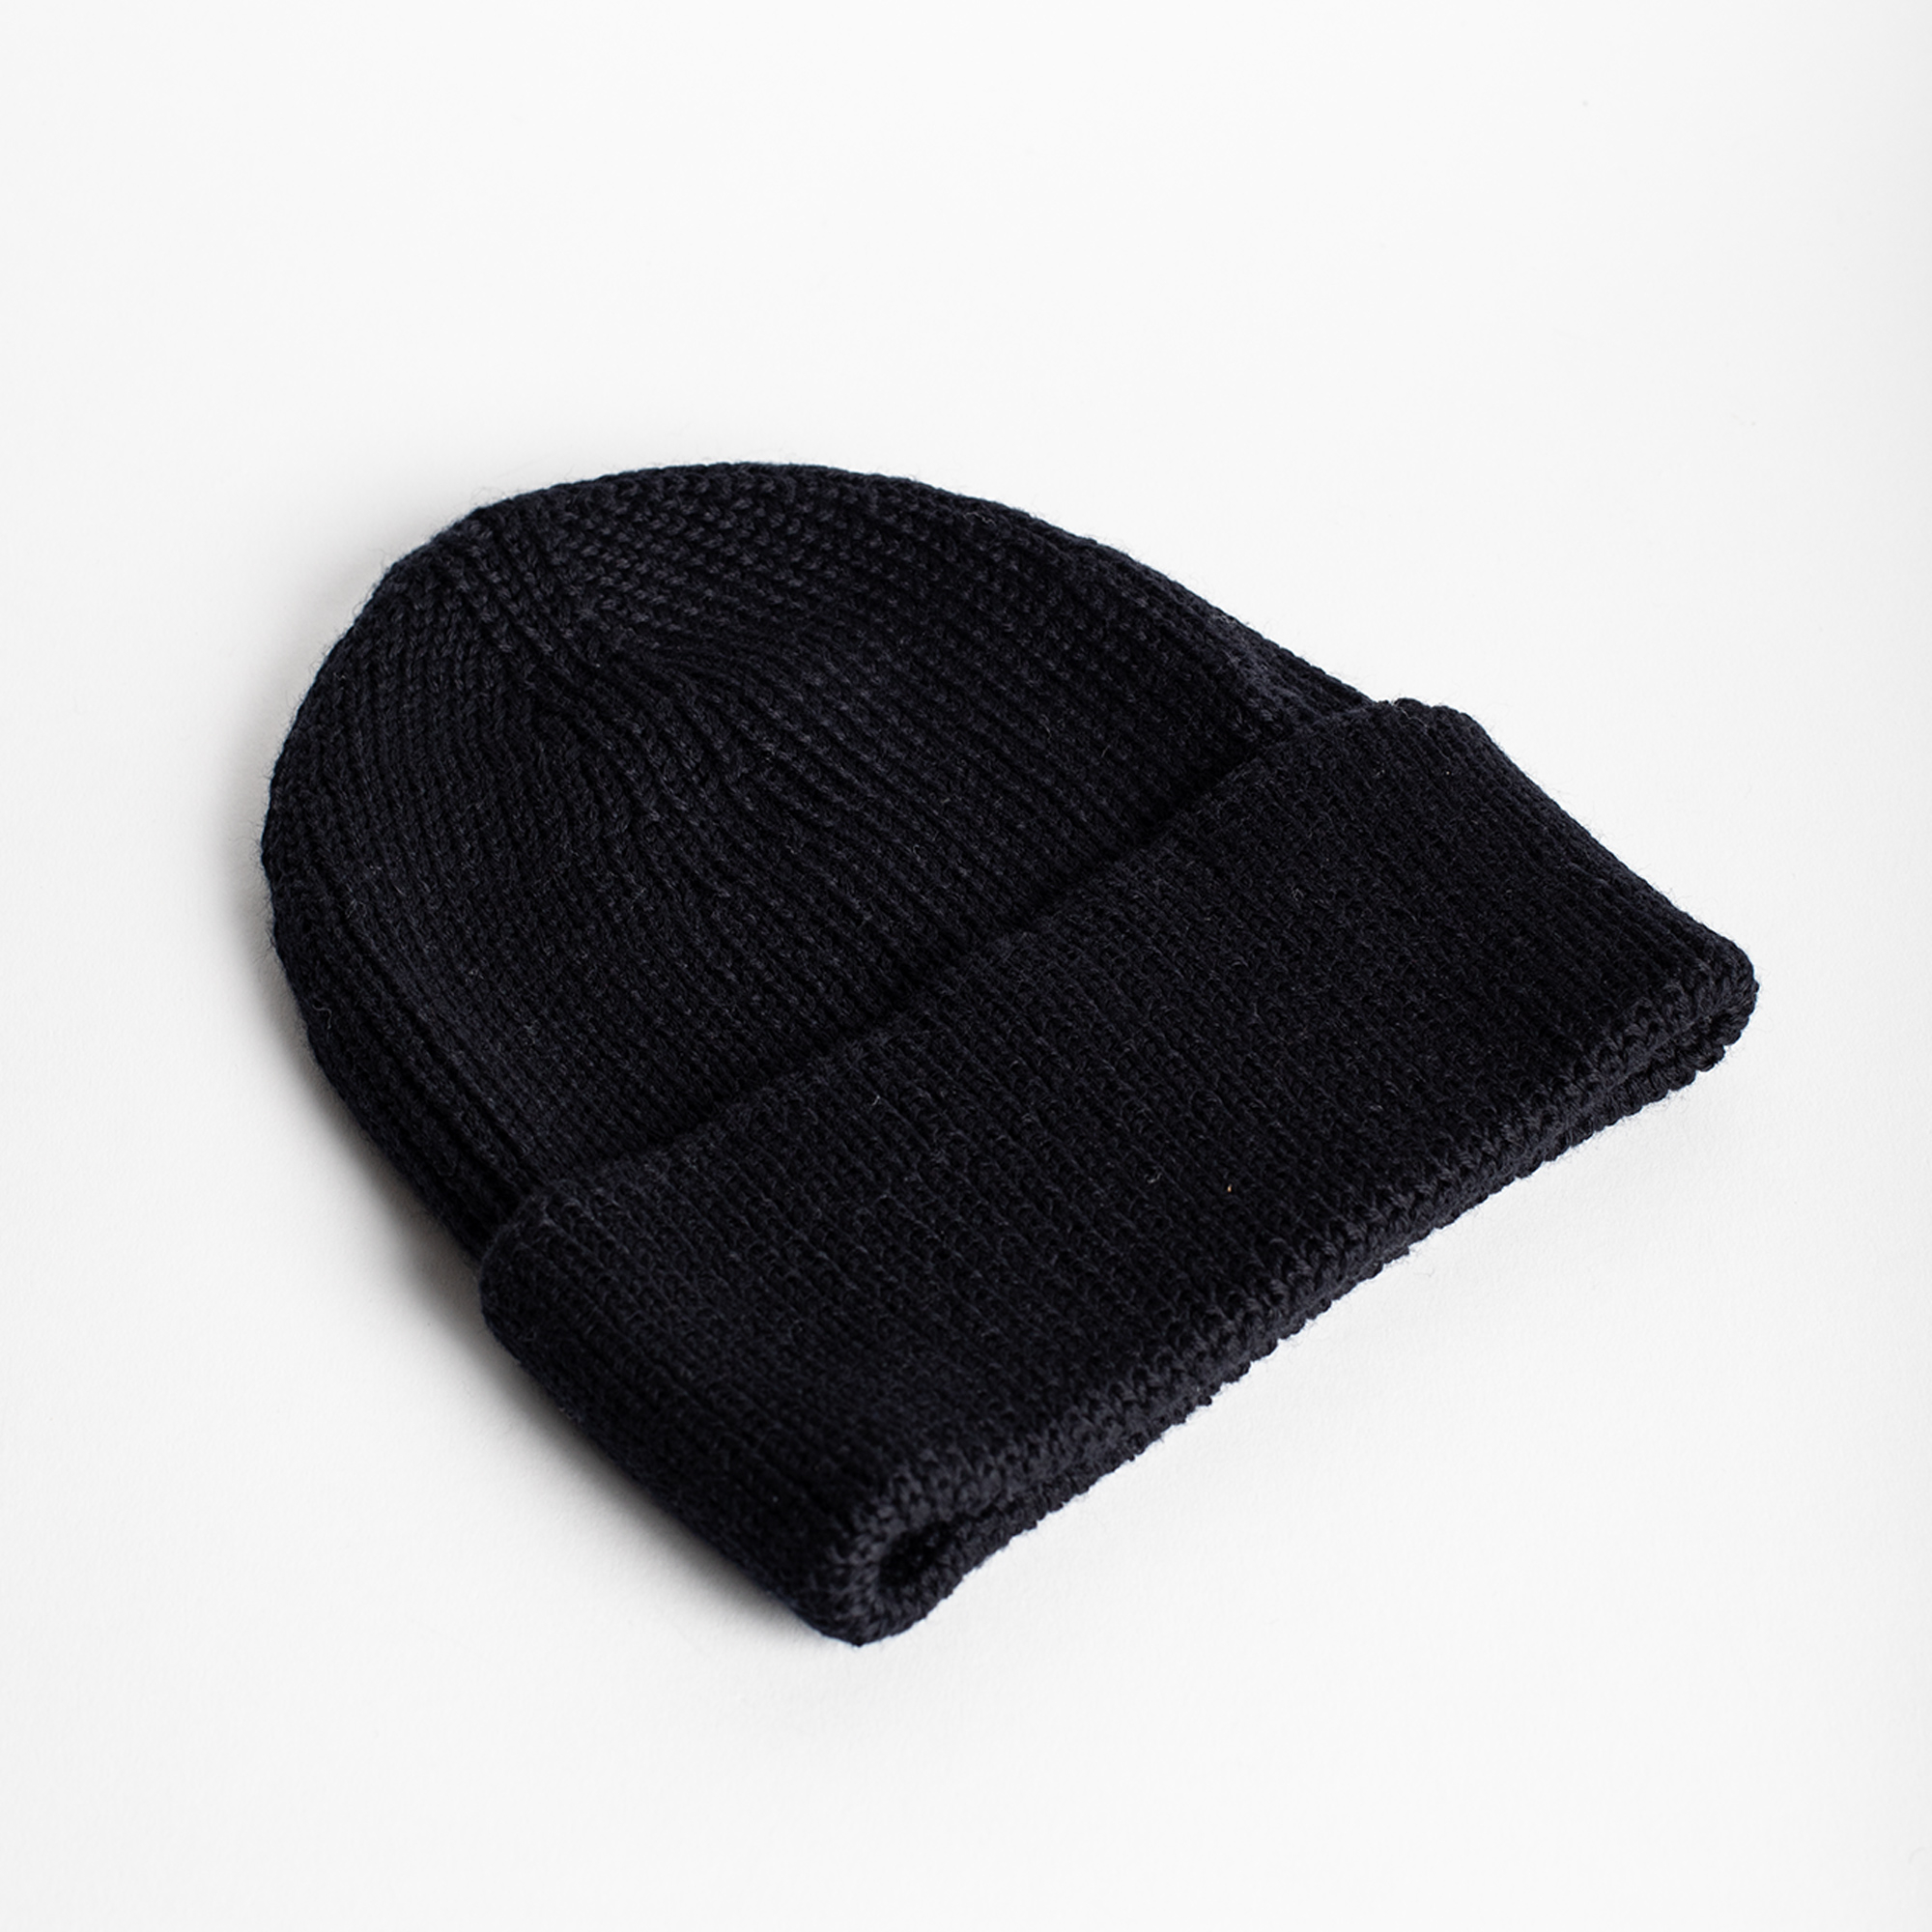 VICKO beanie in Black color by Arpenteur